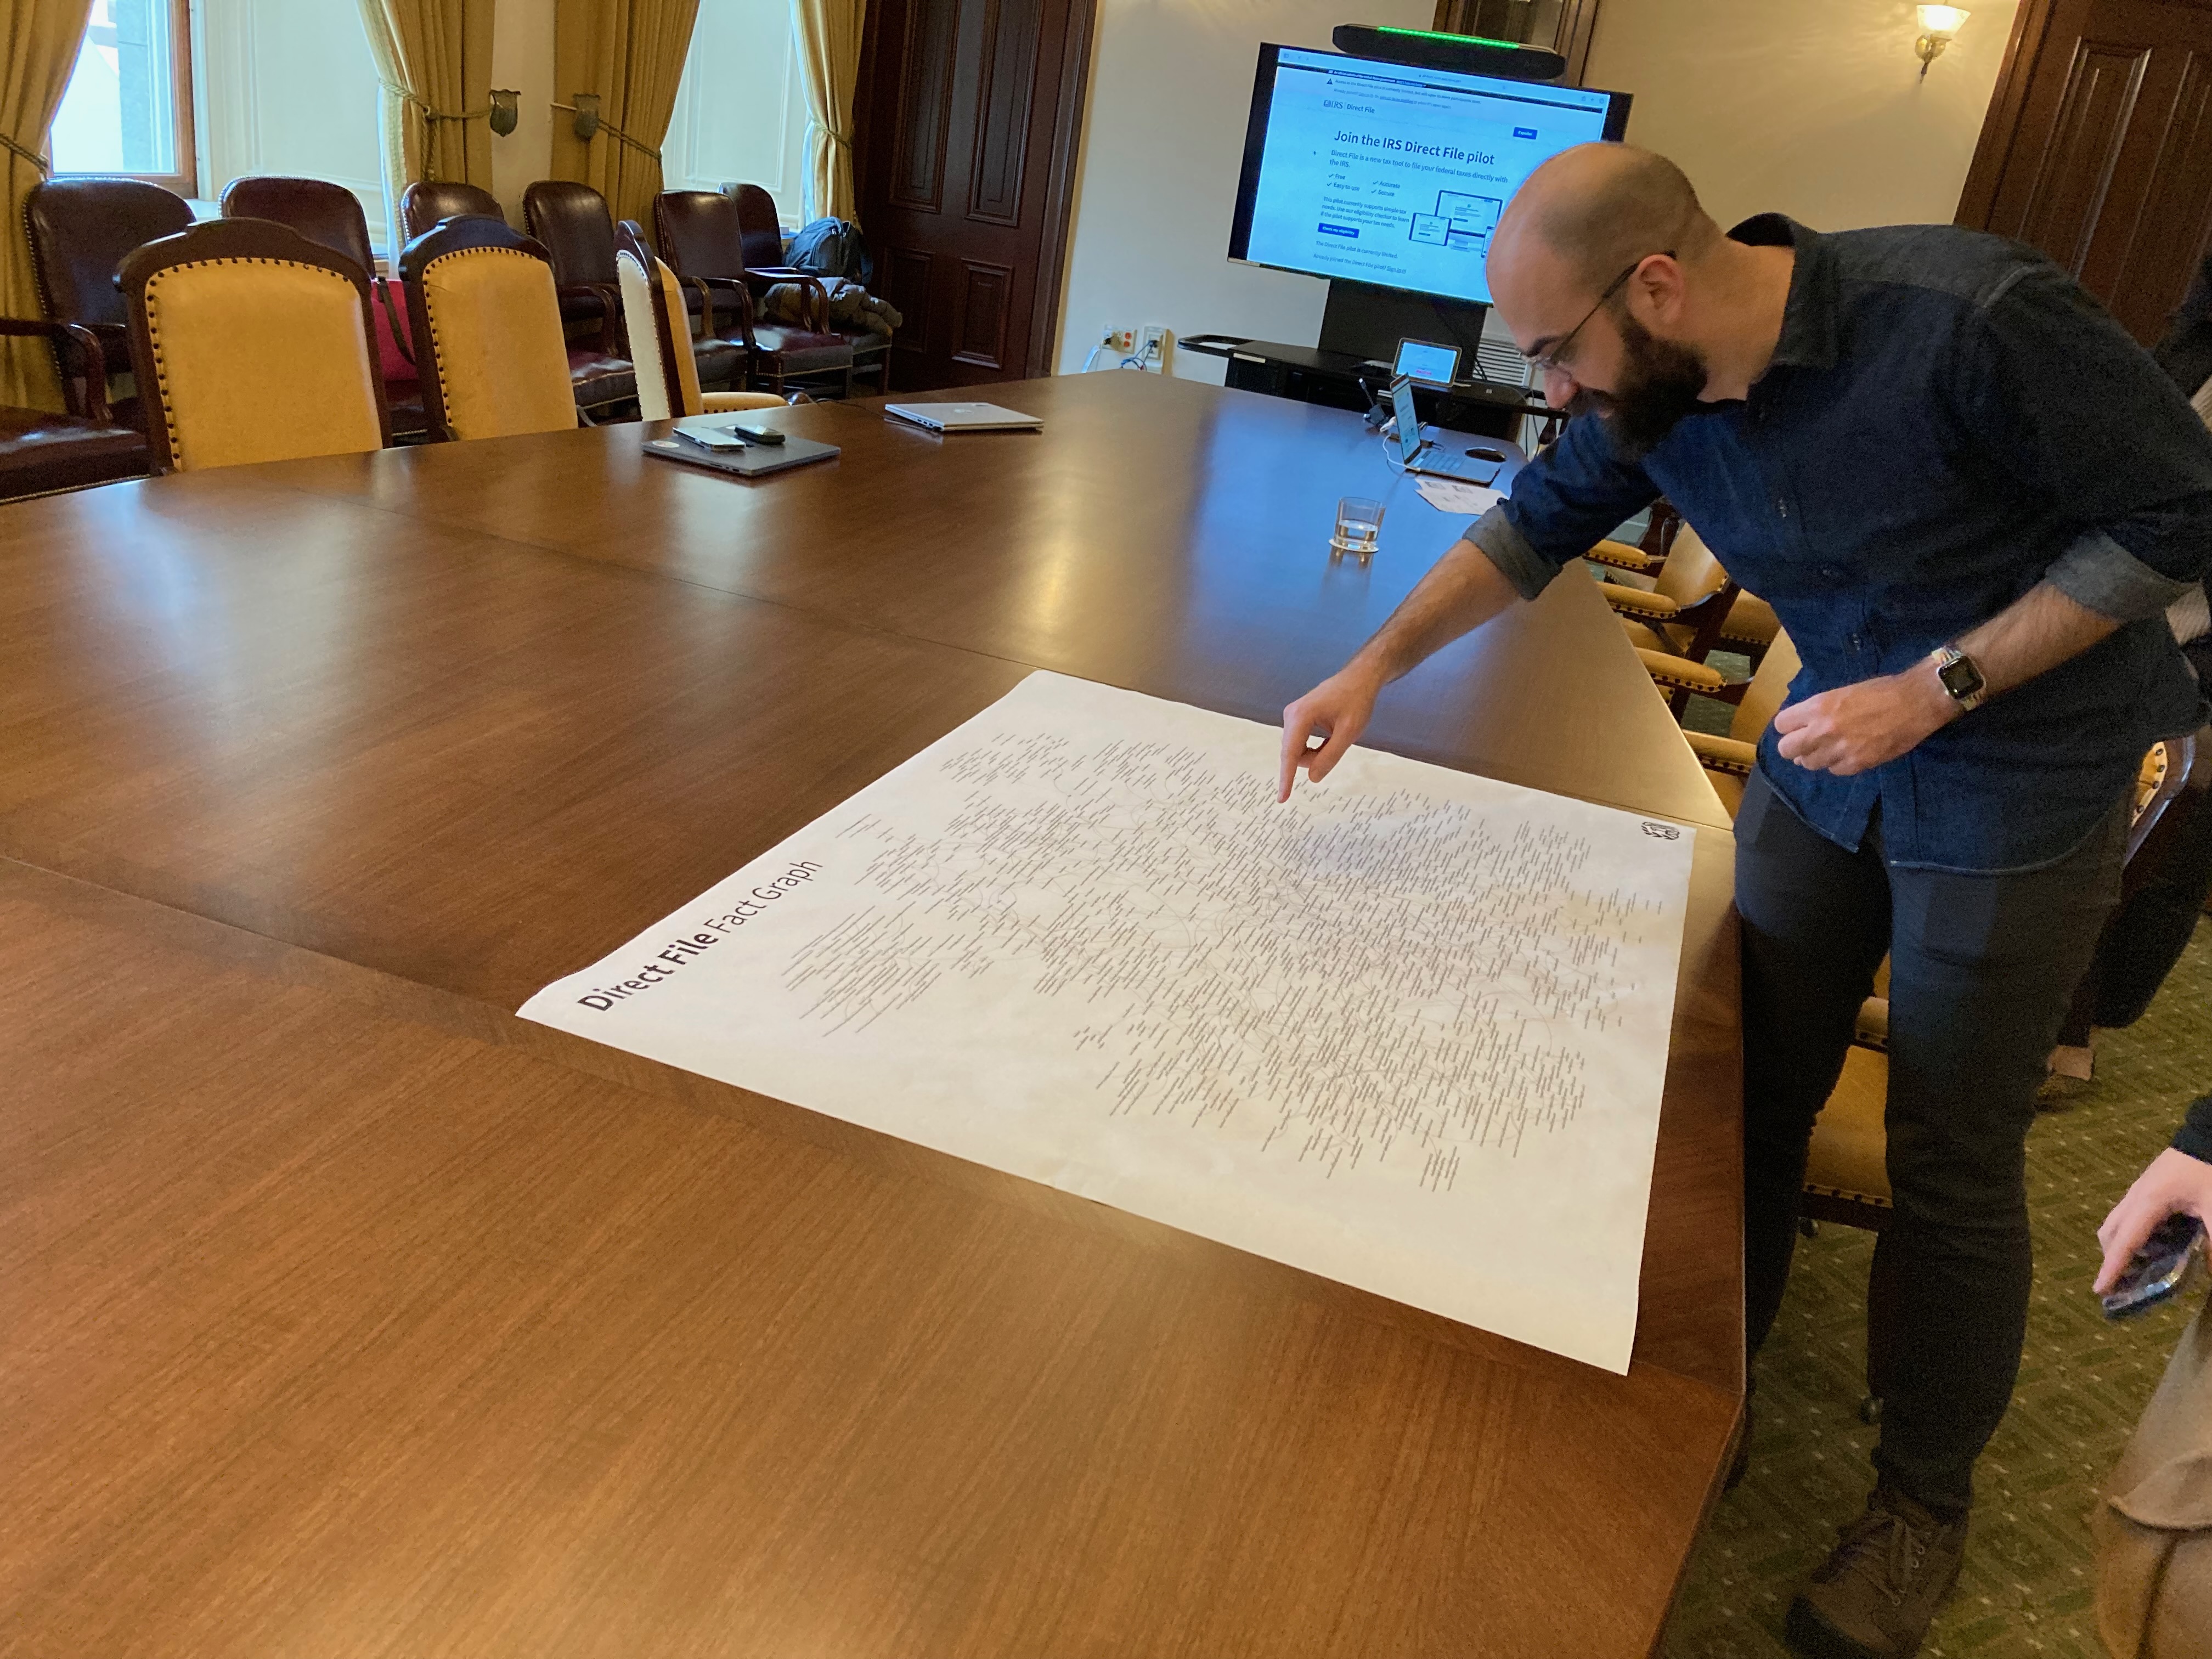 A government software engineer leans over an otherwise empty conference table pointing to a spot on a large board covered in writing.